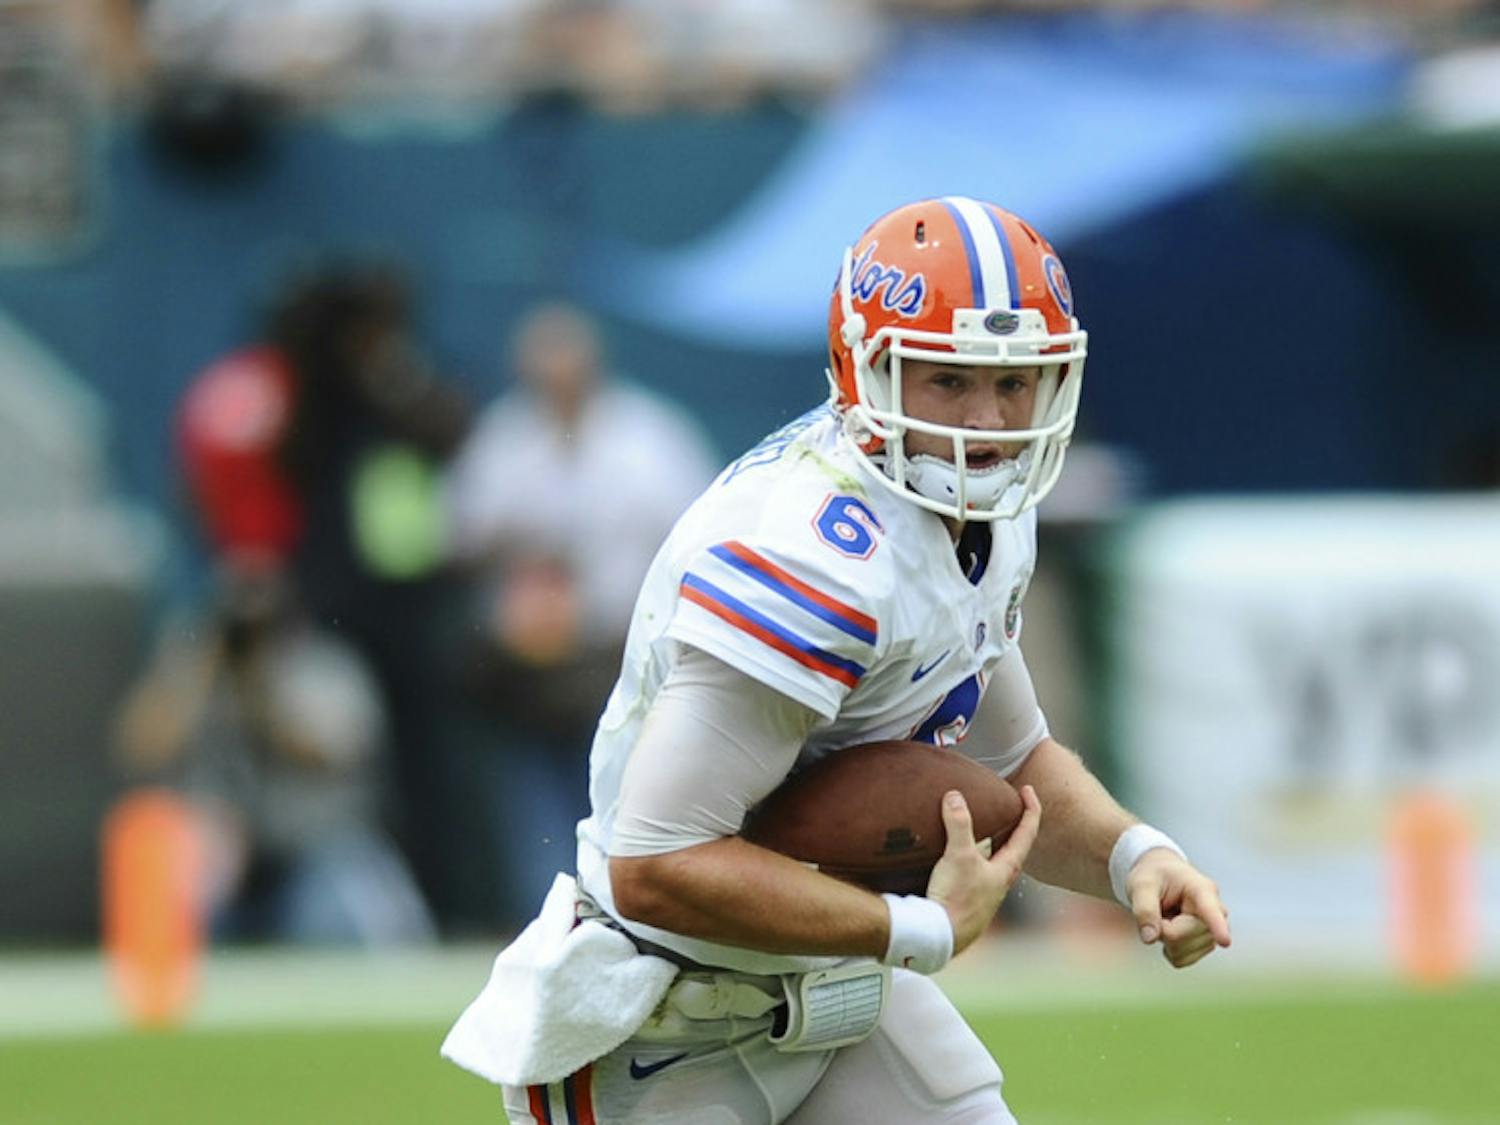 Jeff Driskel rushes during Florida’s 21-16 loss to Miami on Saturday in Sun Life Stadium. Driskel suffered a knee sprain in the game but is expected to face Tennessee on Sept. 21.